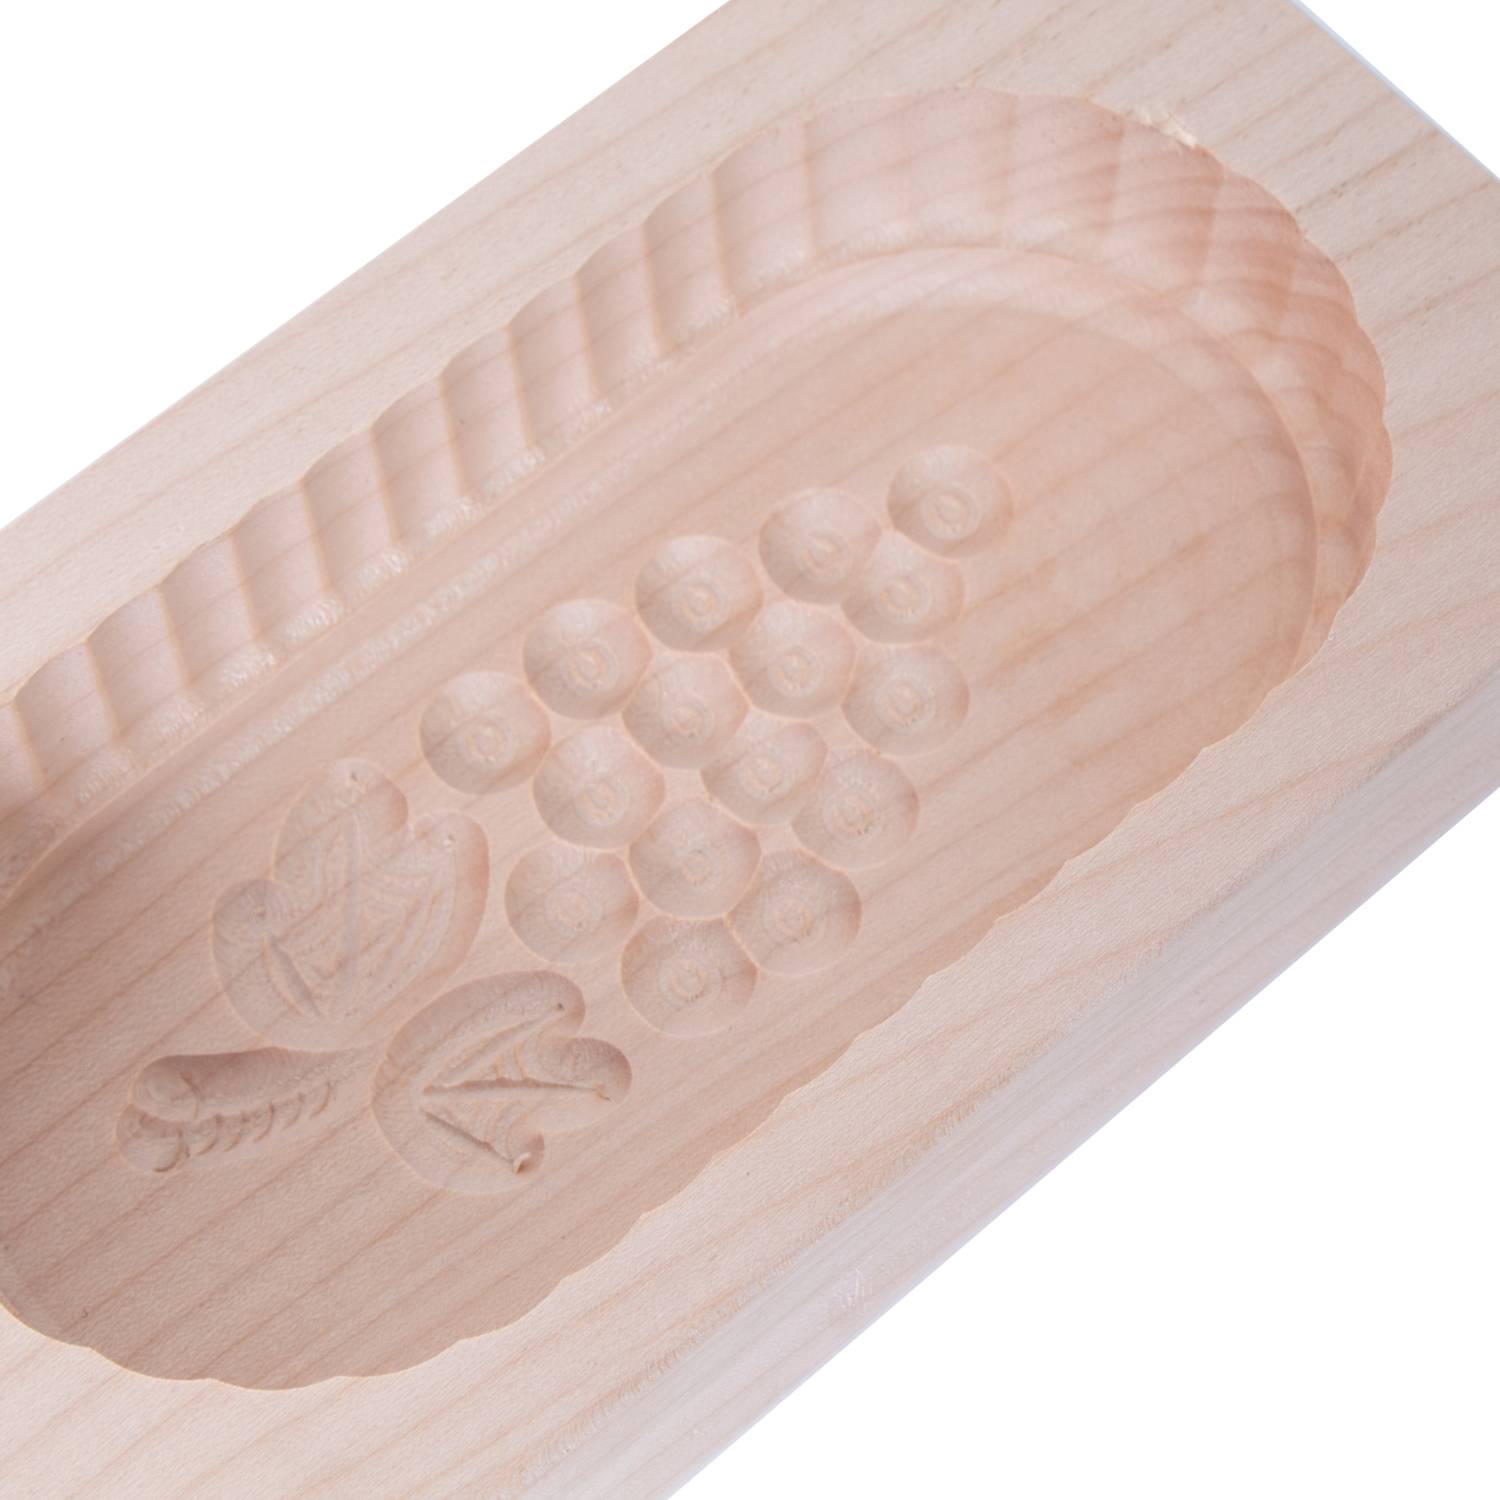 SWEET MARY'S WOOD BUTTER MOLD – Grit